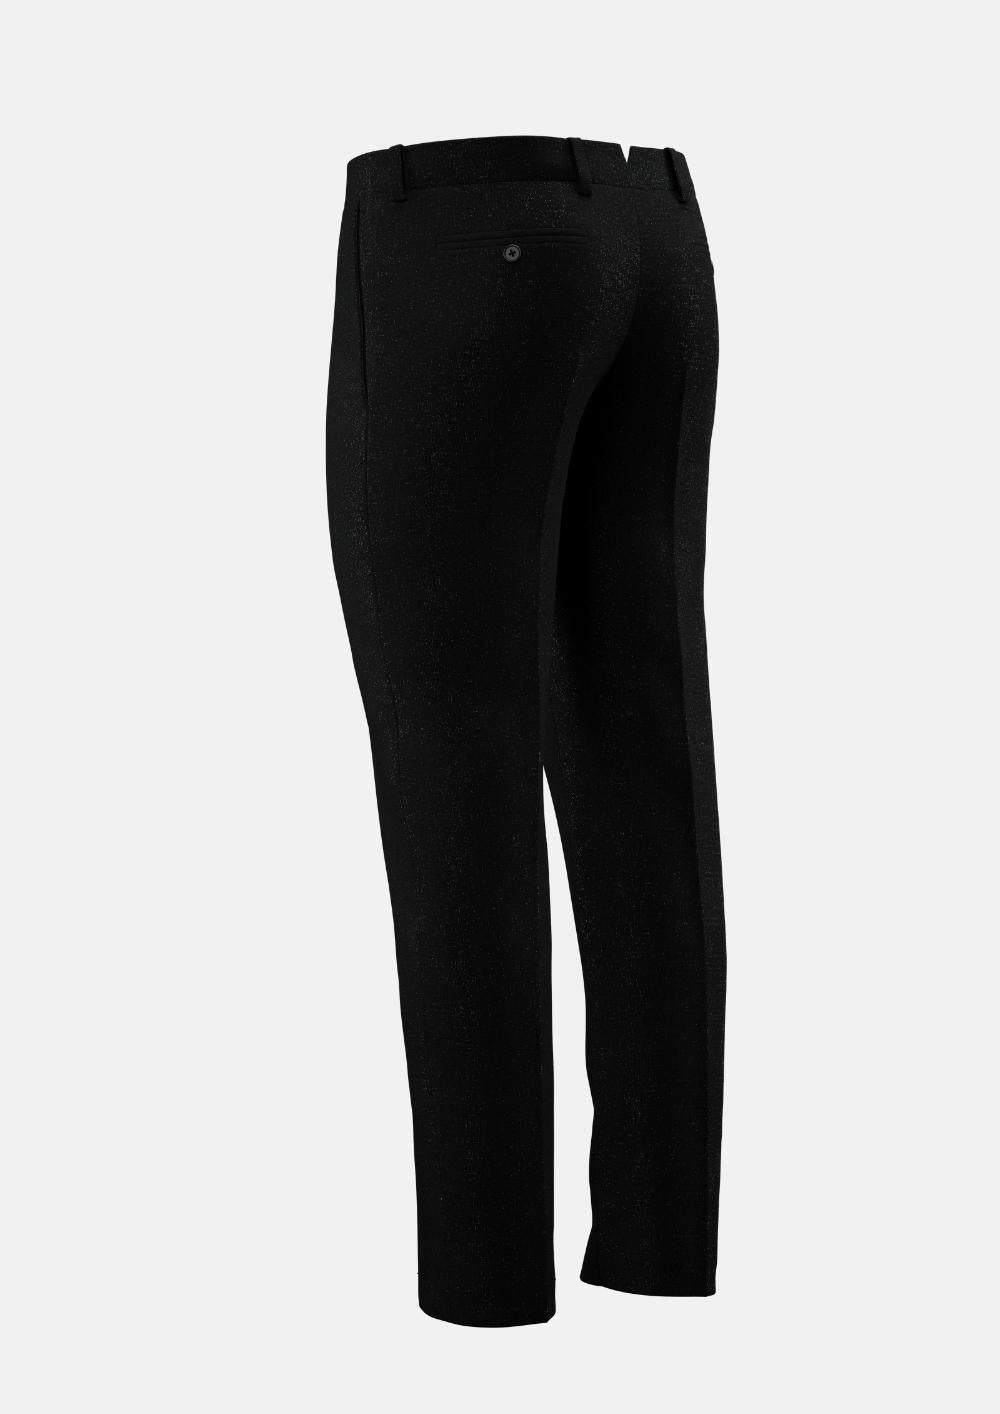 Pieces Tall glitter high rise flared pants in black | ASOS